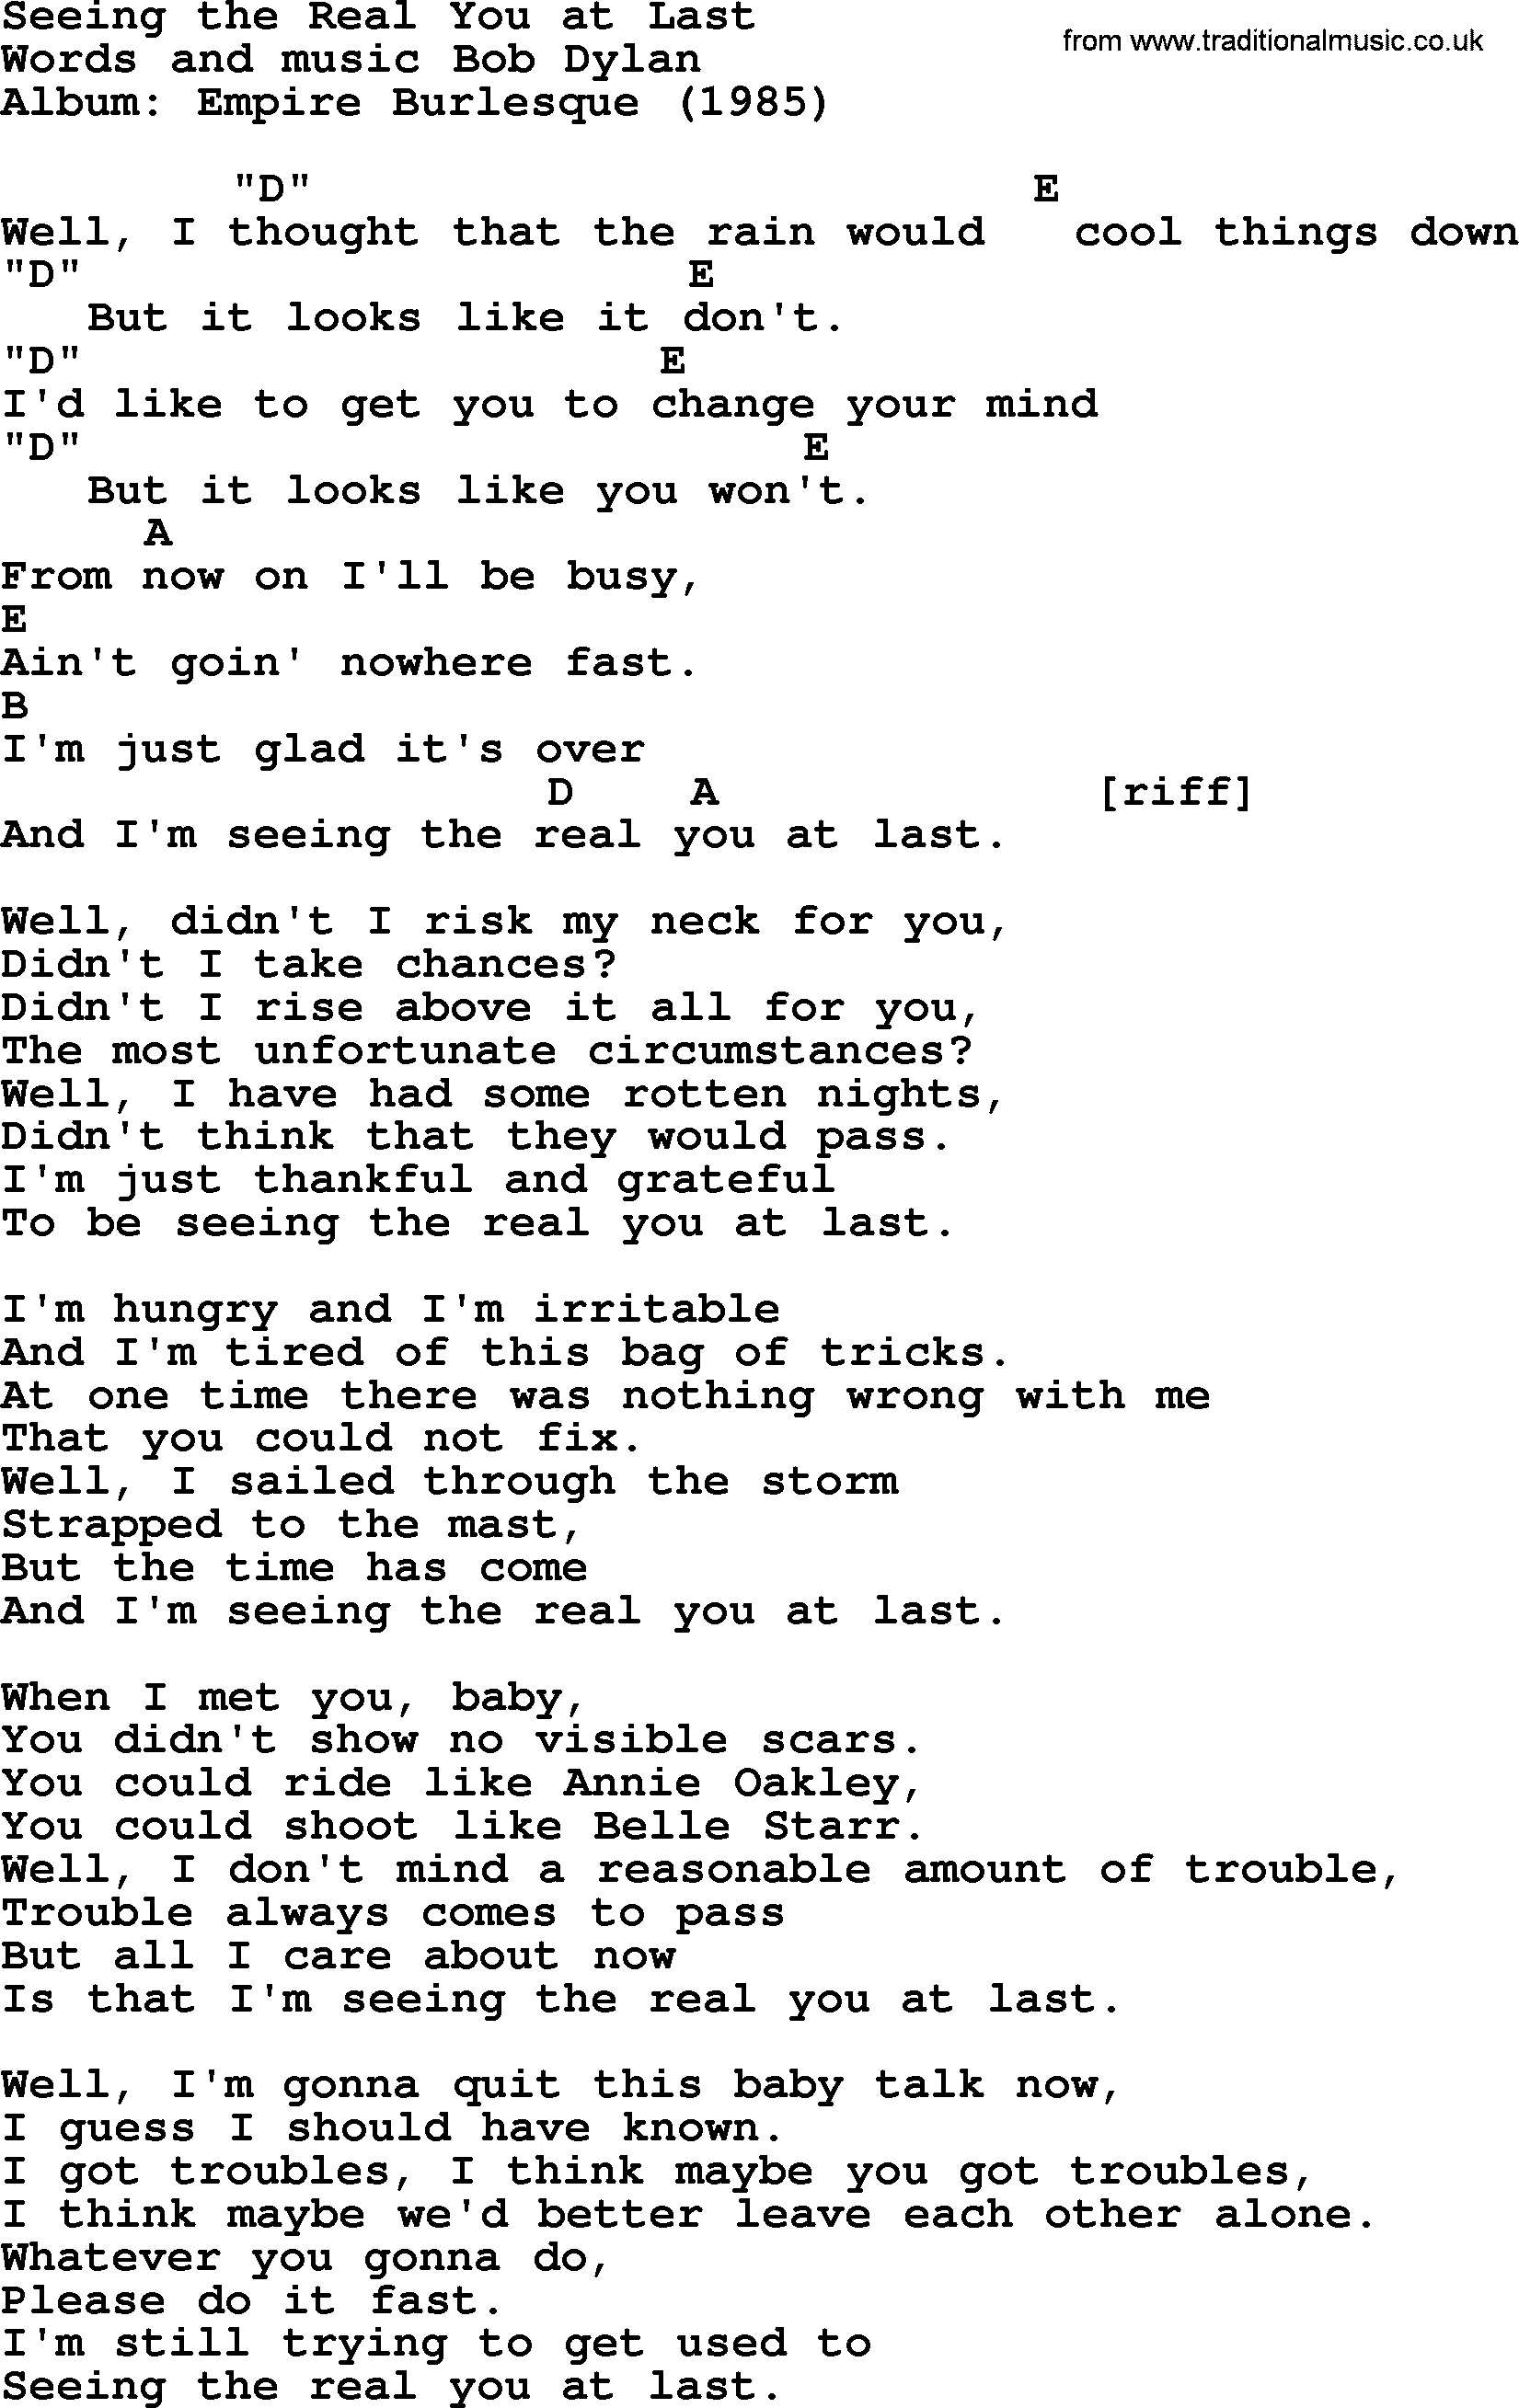 Bob Dylan song, lyrics with chords - Seeing the Real You at Last